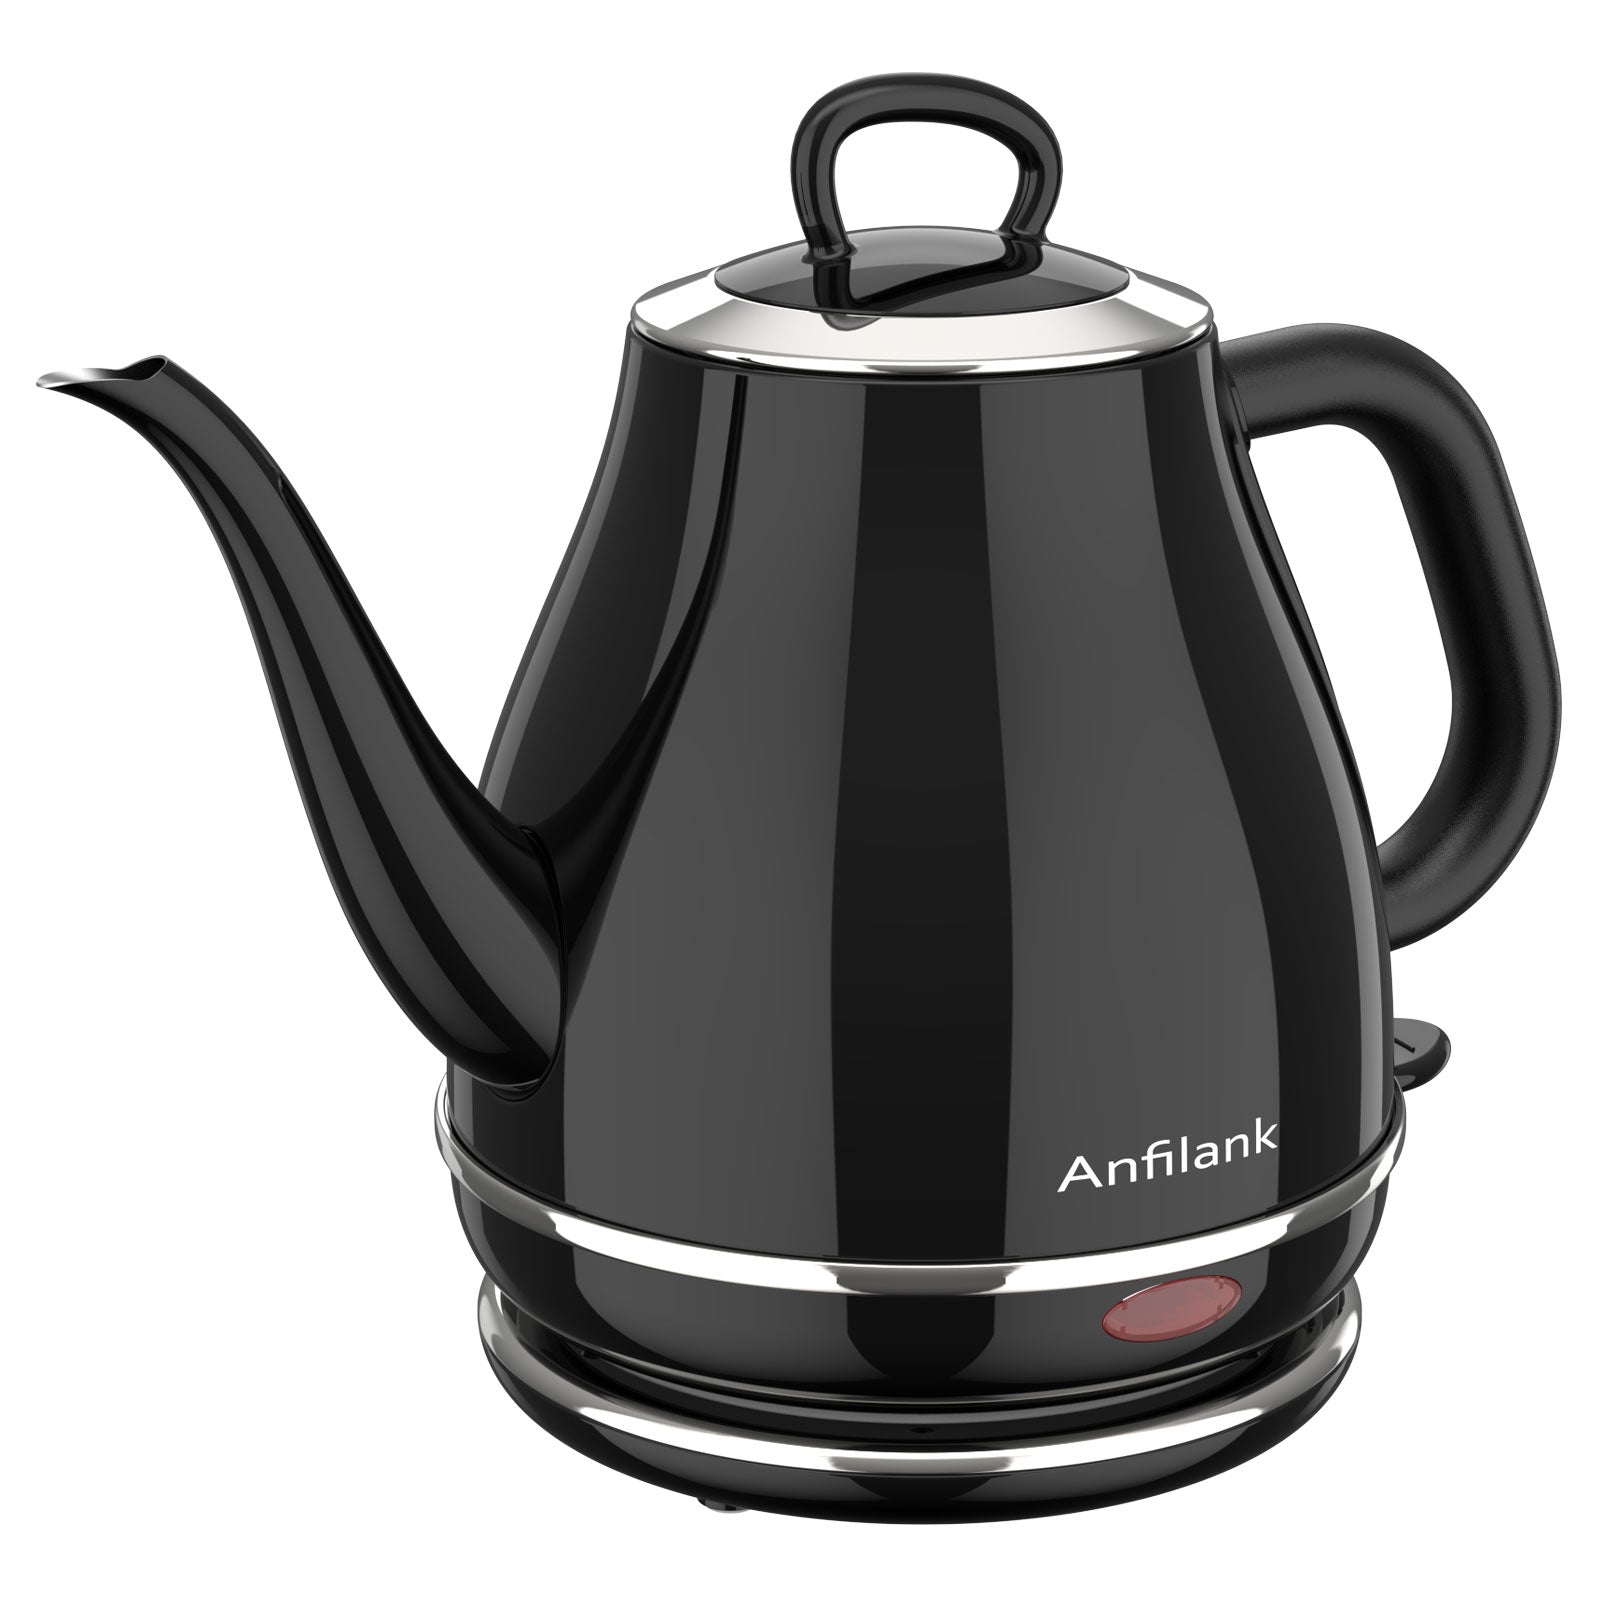 Anfilank Gooseneck Electric Kettle(1.0L), 100% Stainless Steel BPA Free Classic Pour Over Coffee Kettle, Electric Teapot with Auto Shut-Off Protection, JK-156